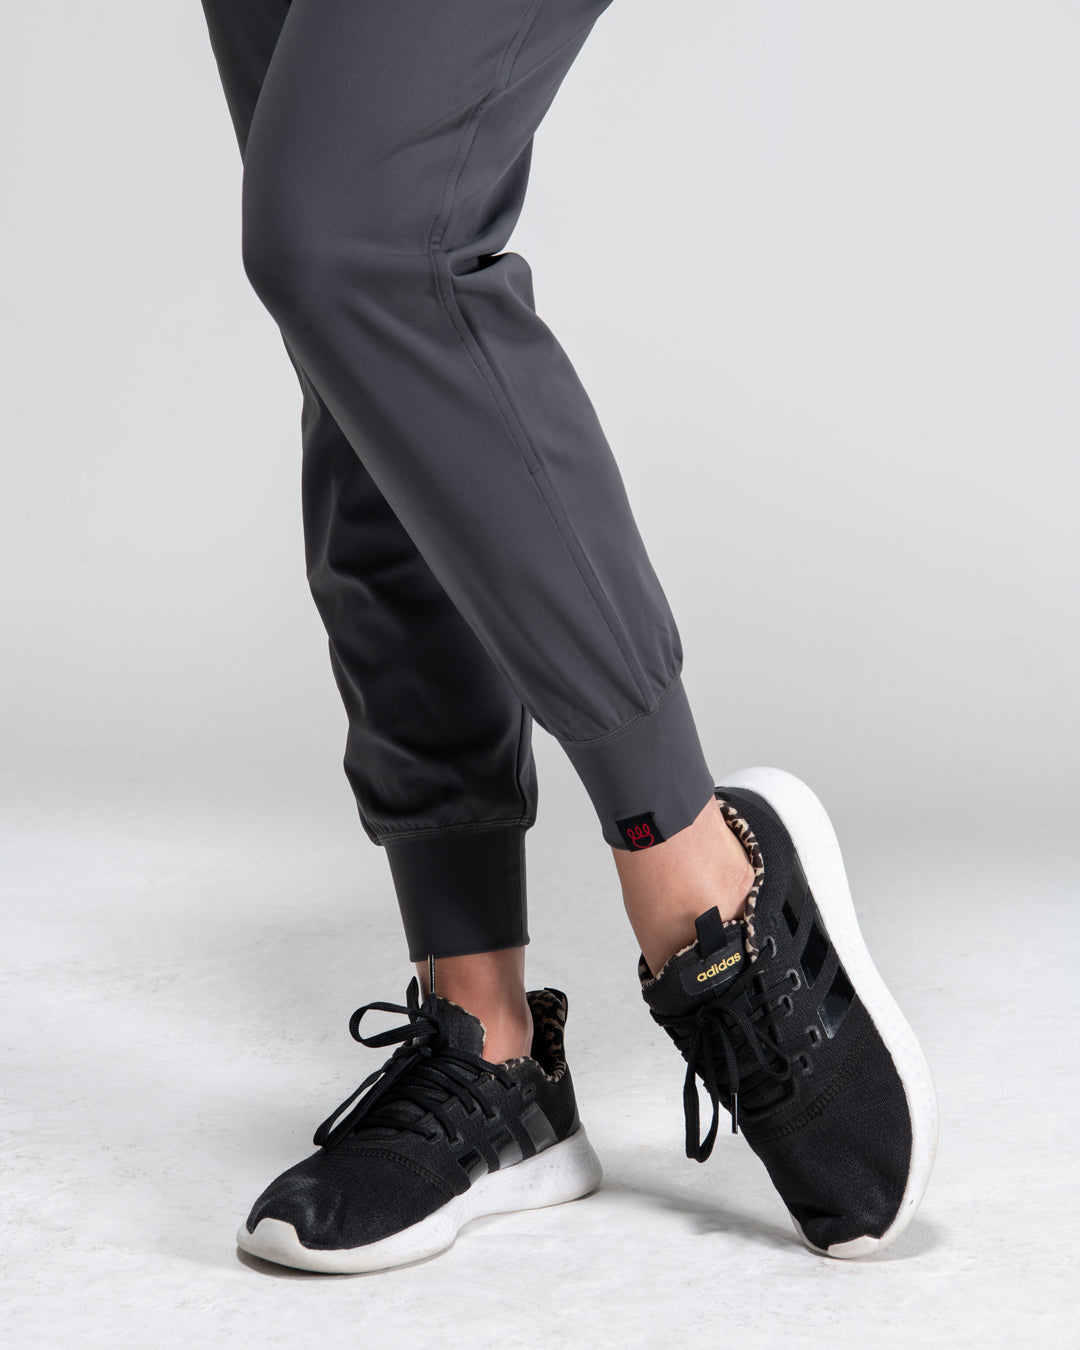 Kadyluxe womens jogger in color gray. Tapered leg and premium activewear fabric. Detail close up shot.